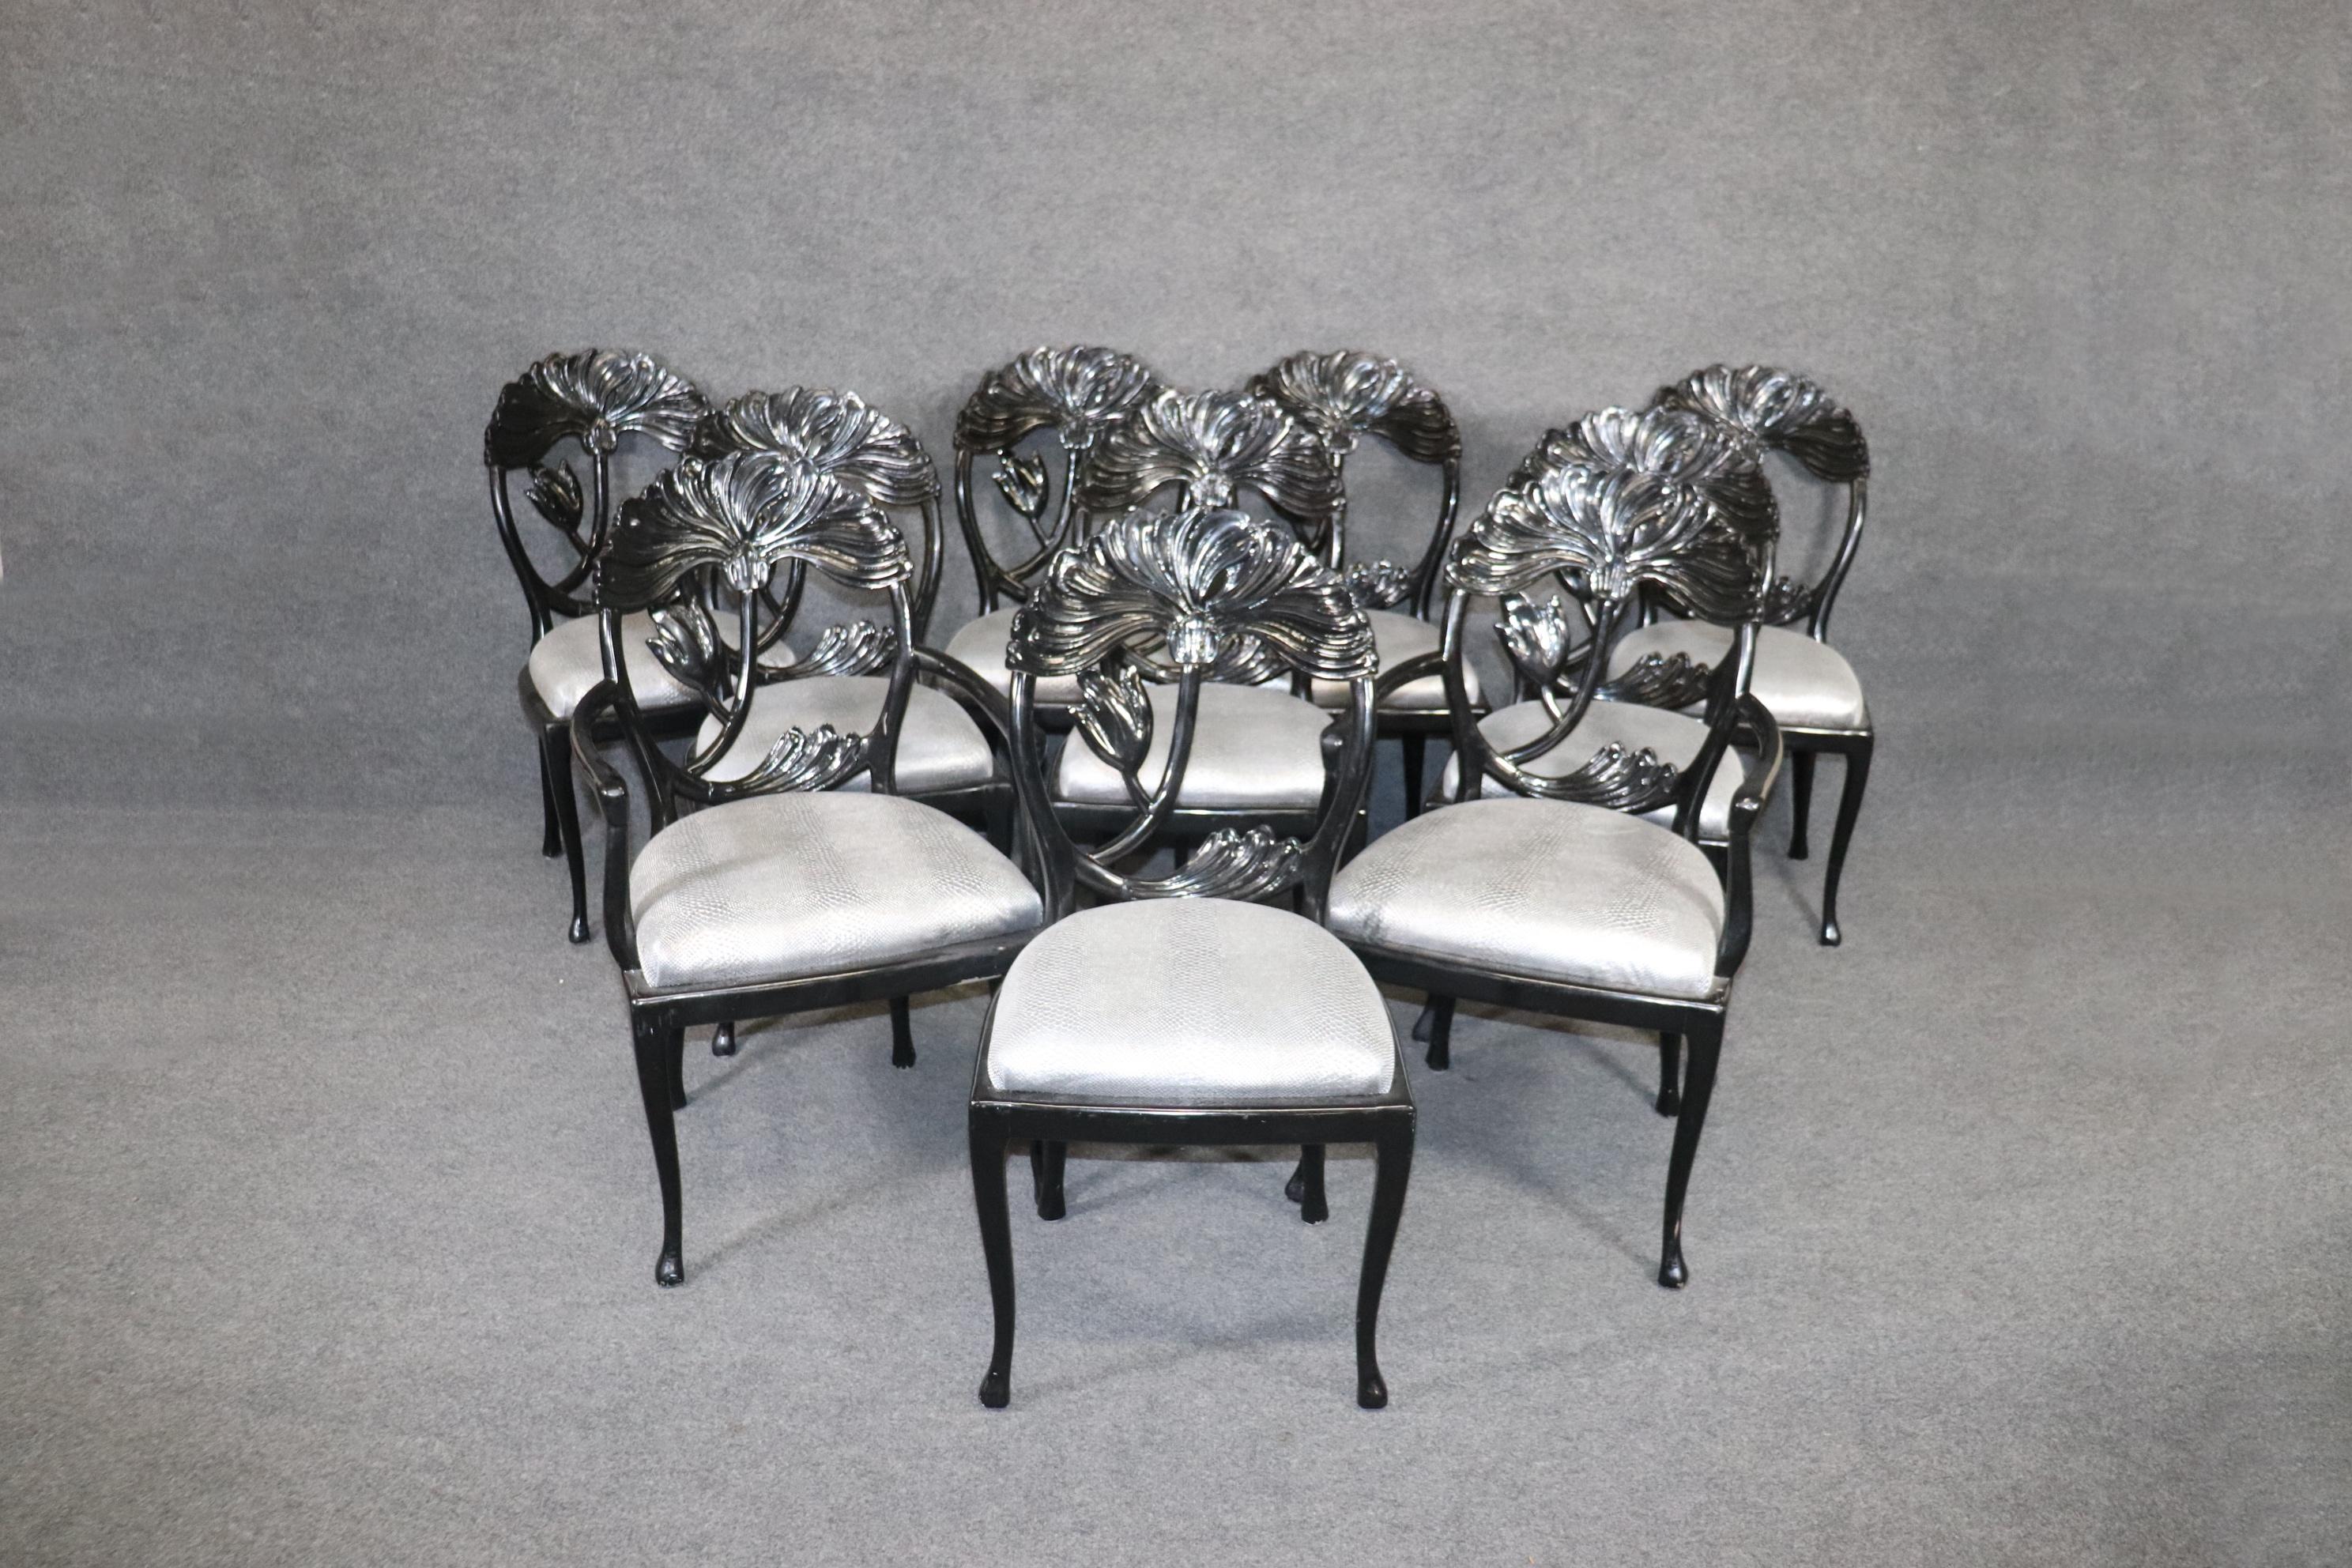 This set of 10 black Lacquered MCM Regency style dining chairs are made of the highest quality and are really beautiful! There are 8 side chairs and 2 arm chairs. If you look at the photos provided you will see the attention to detail in the